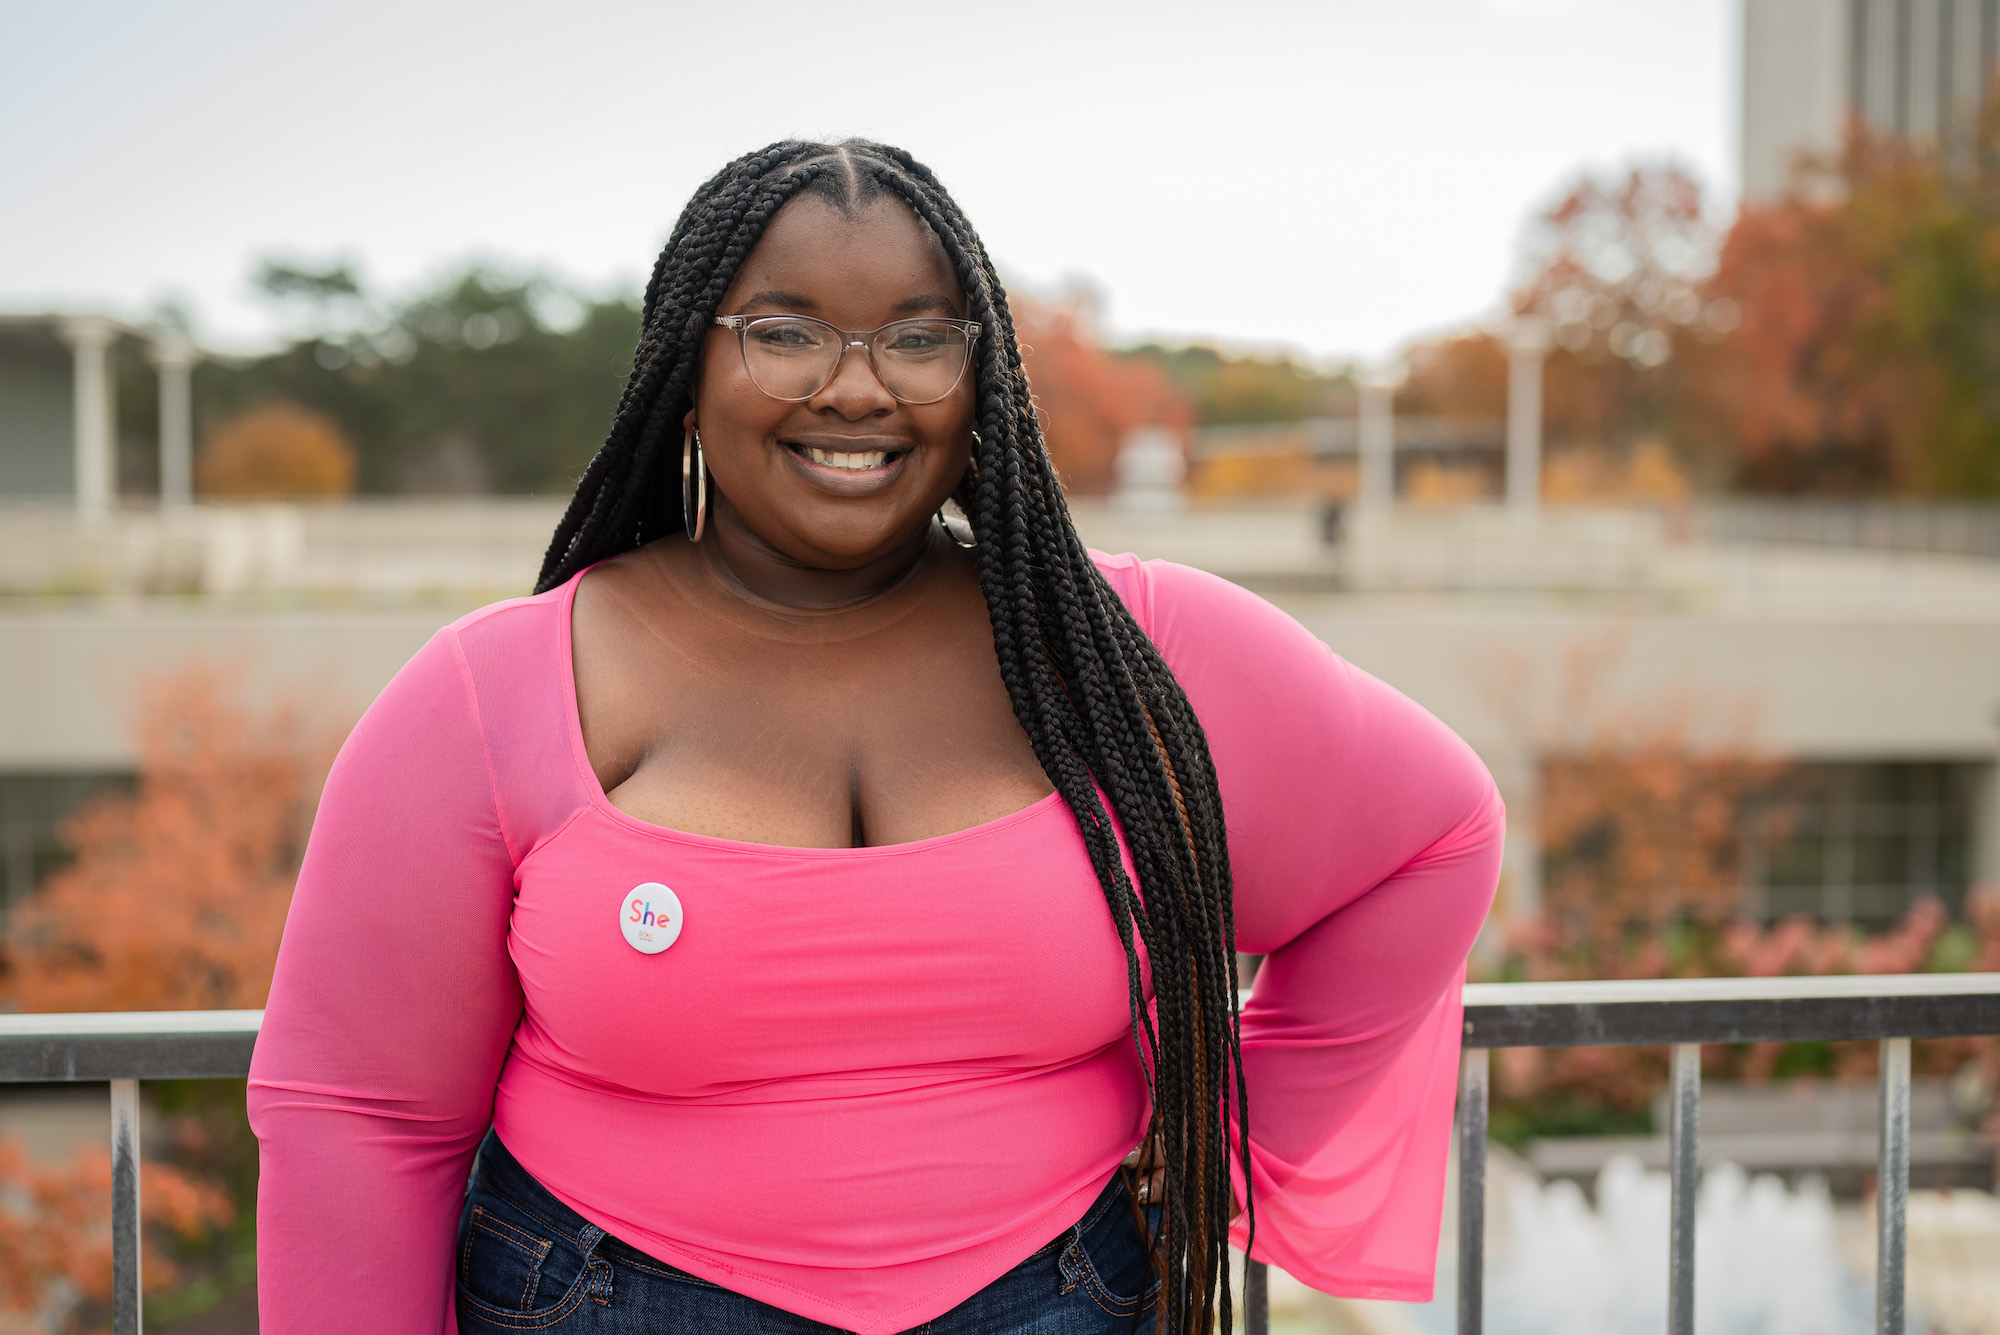 A young woman with long black hair in braids and a bright pink blouse poses on the UAlbany campus. Fall foliage can be seen in the background.